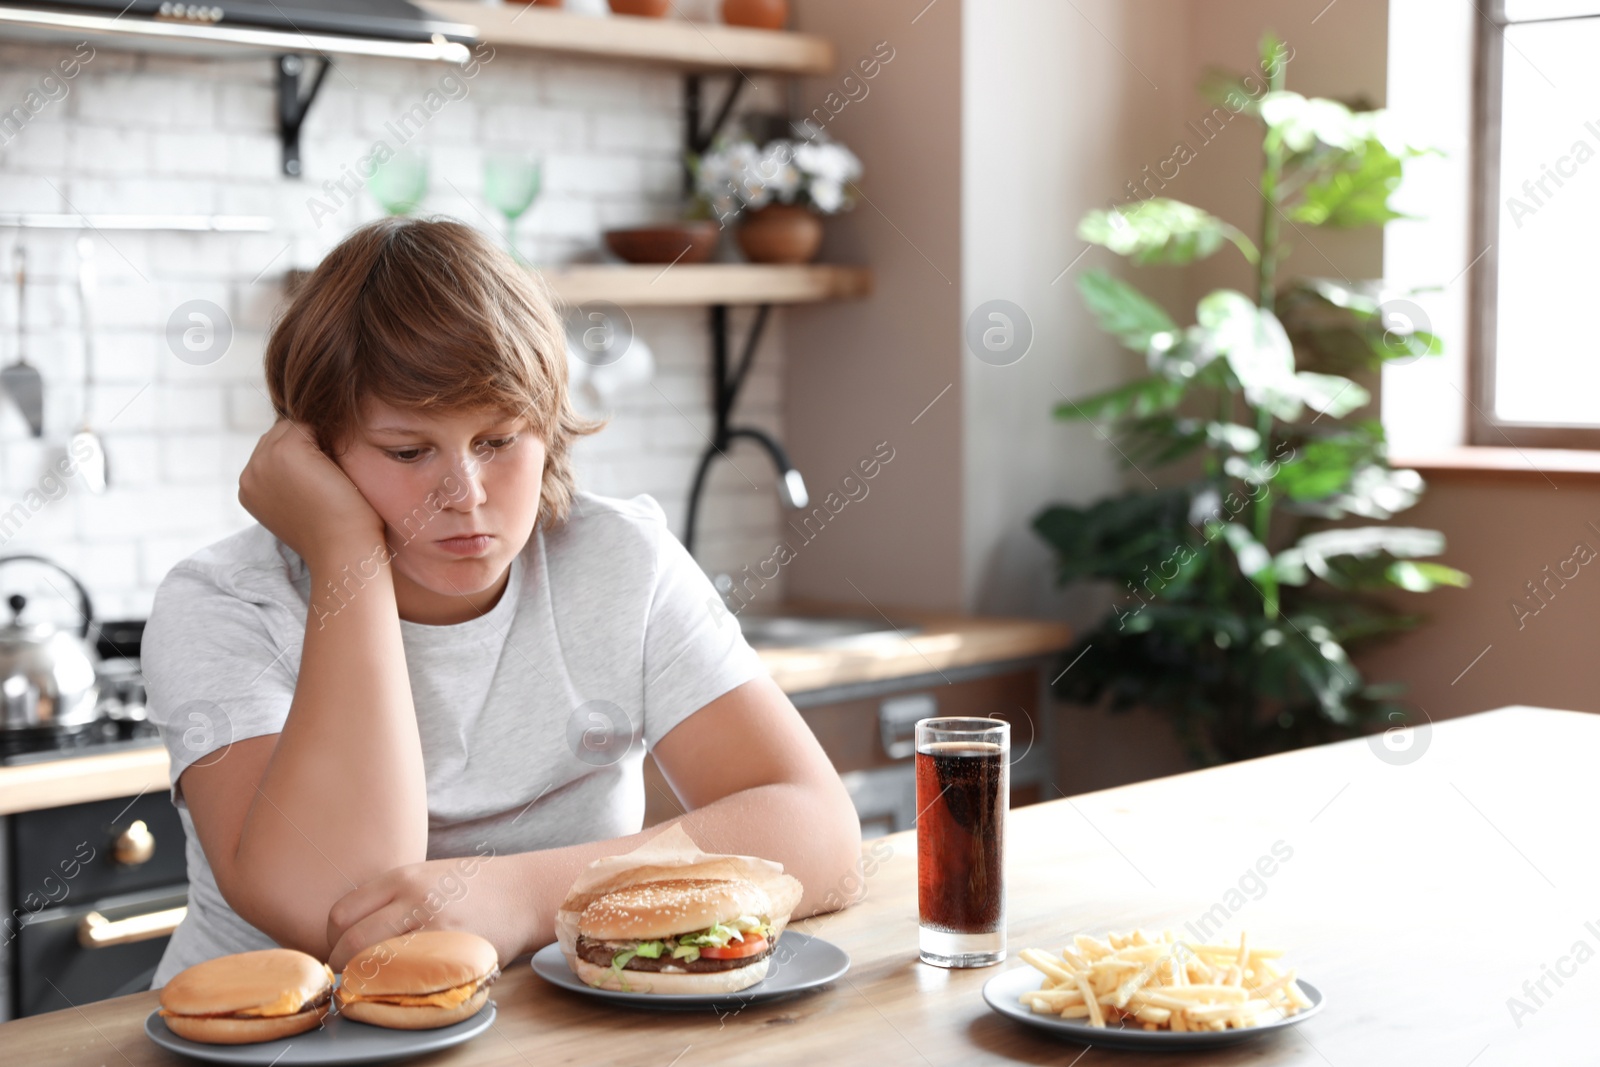 Photo of Emotional overweight boy at table with fast food in kitchen